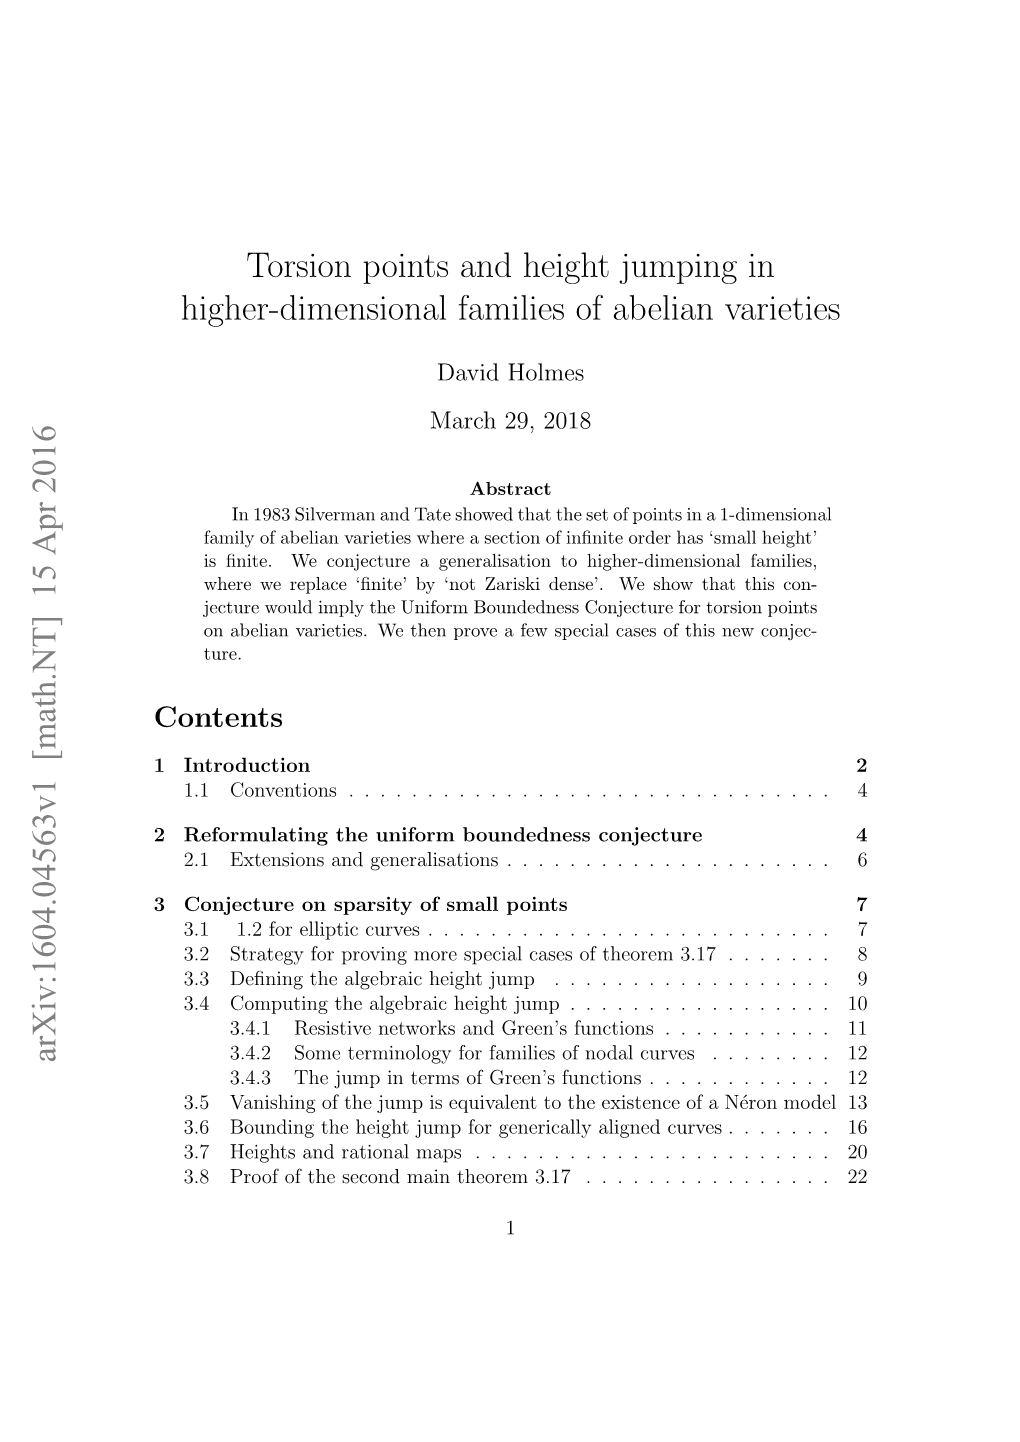 Torsion Points and Height Jumping in Higher-Dimensional Families of Abelian Varieties